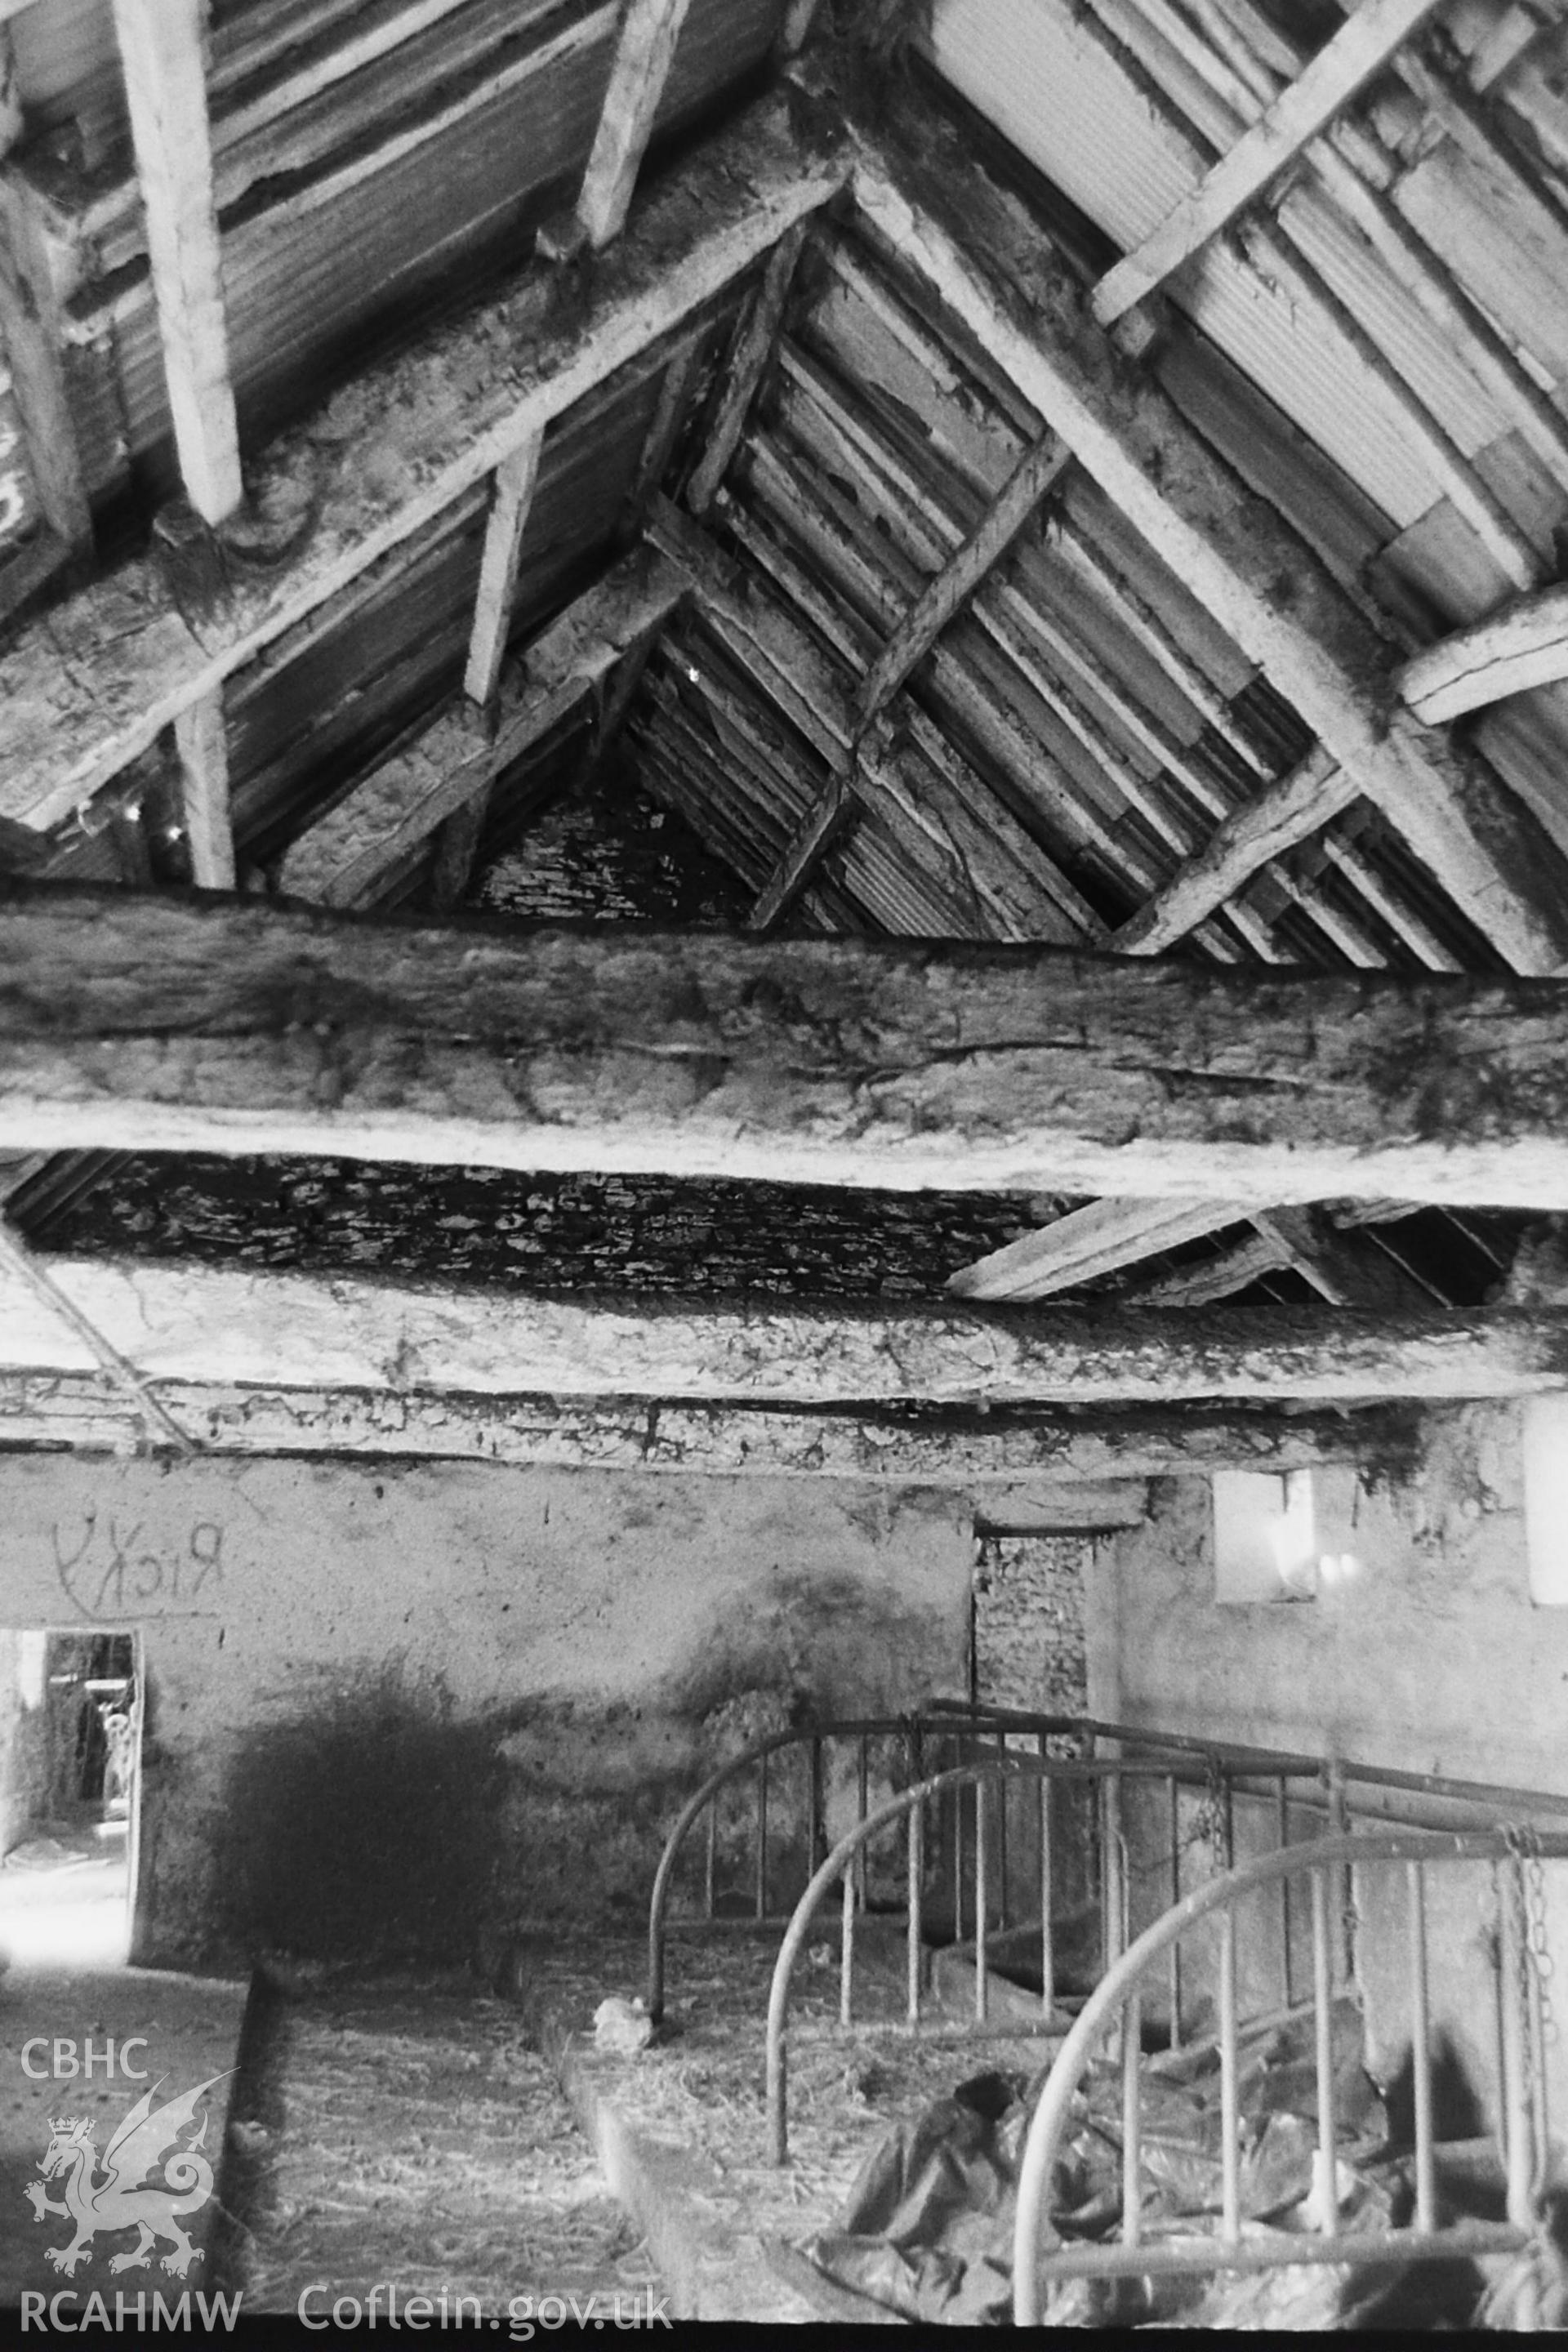 Black and white photo showing interior view of a cowshed at Gellifaelog, Tonypandy  taken by Paul R. Davis in 1984, before demolition.